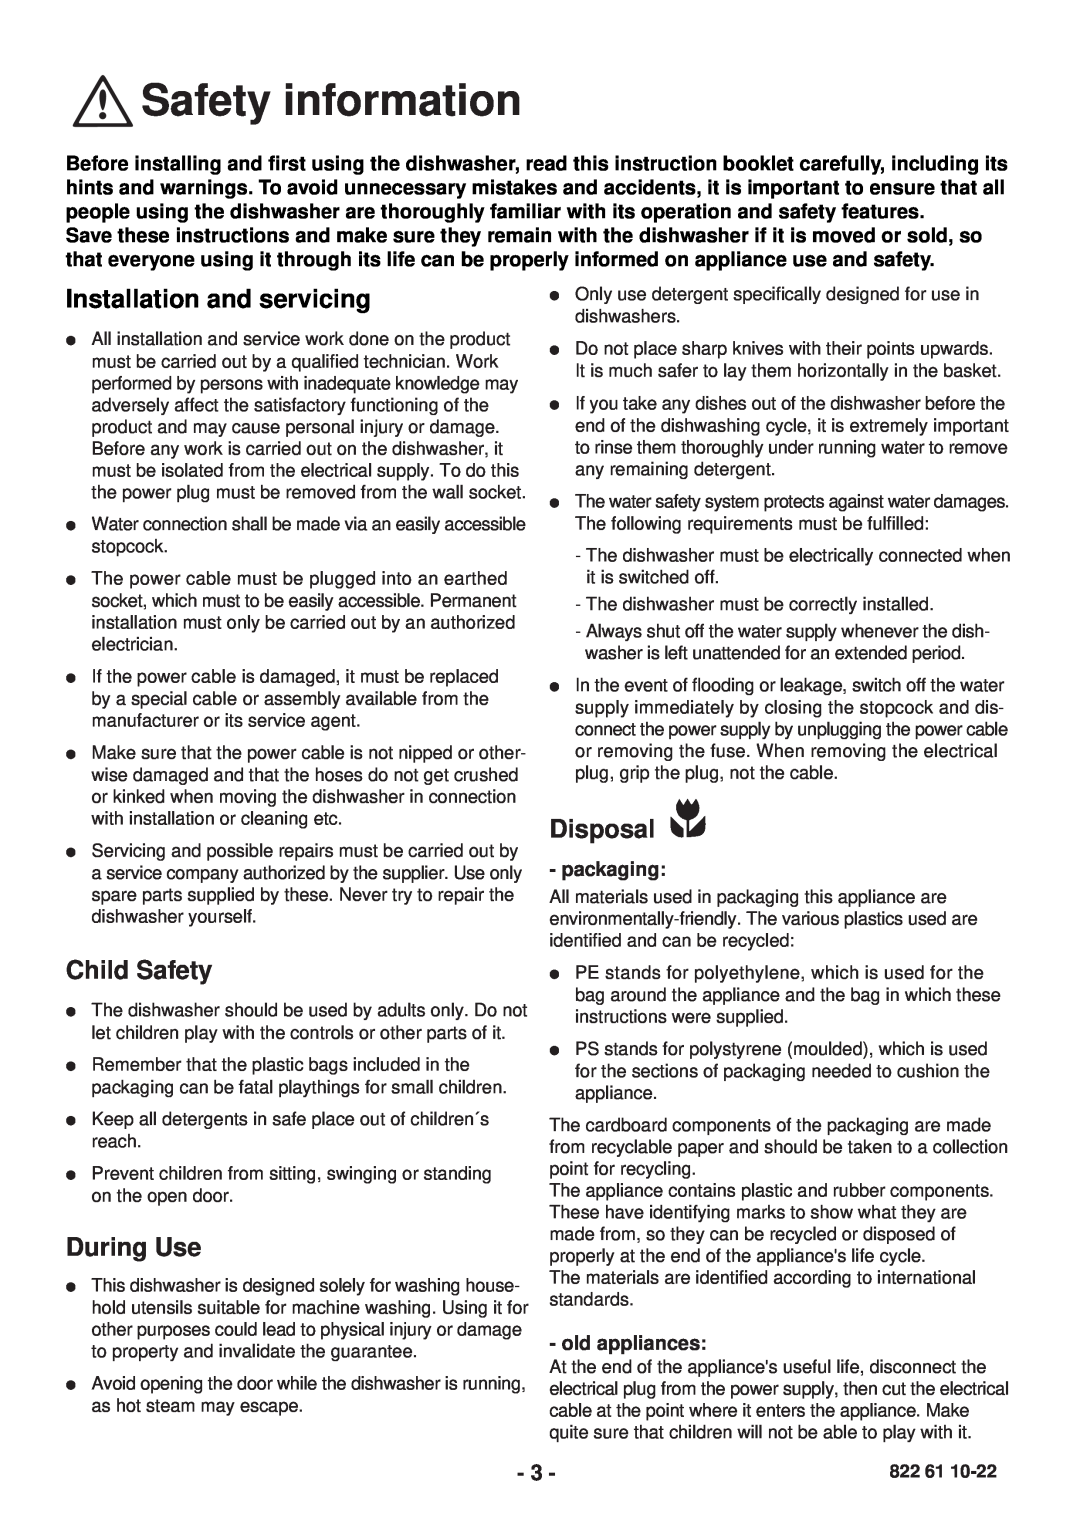 Zanussi ZDC 5465 manual Safety information, Installation and servicing, Child Safety, During Use, Disposal 